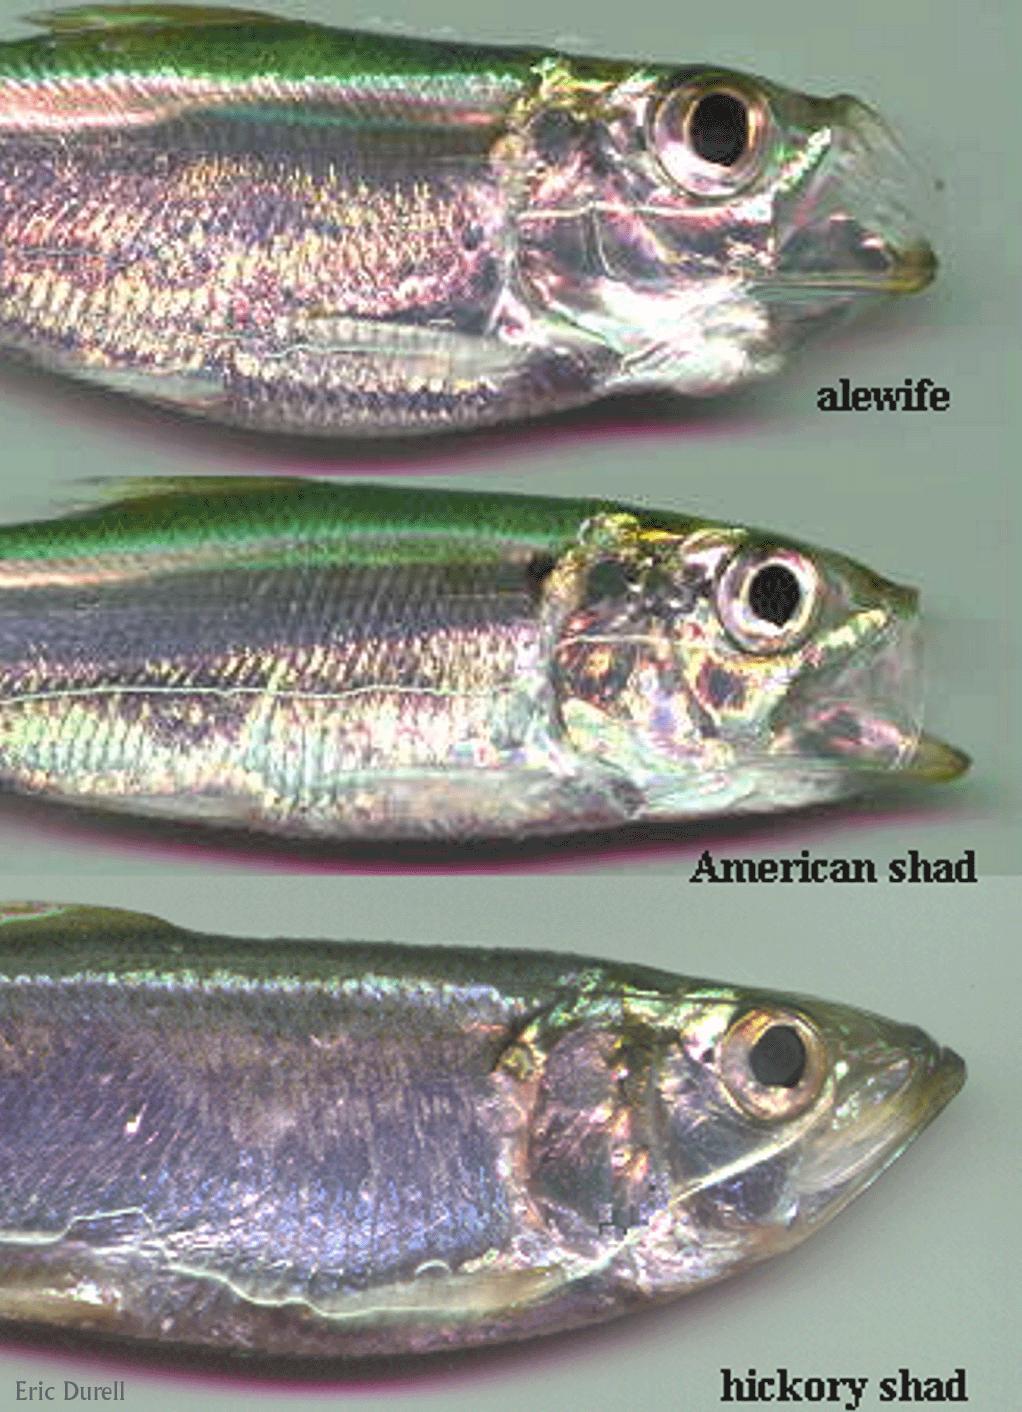 The Herrings (Family Clupeidae) The Alosids They are all the same genus and therefore look very similar Alewife (Alosa psuedoharengus) American shad (Alosa sapidissima)